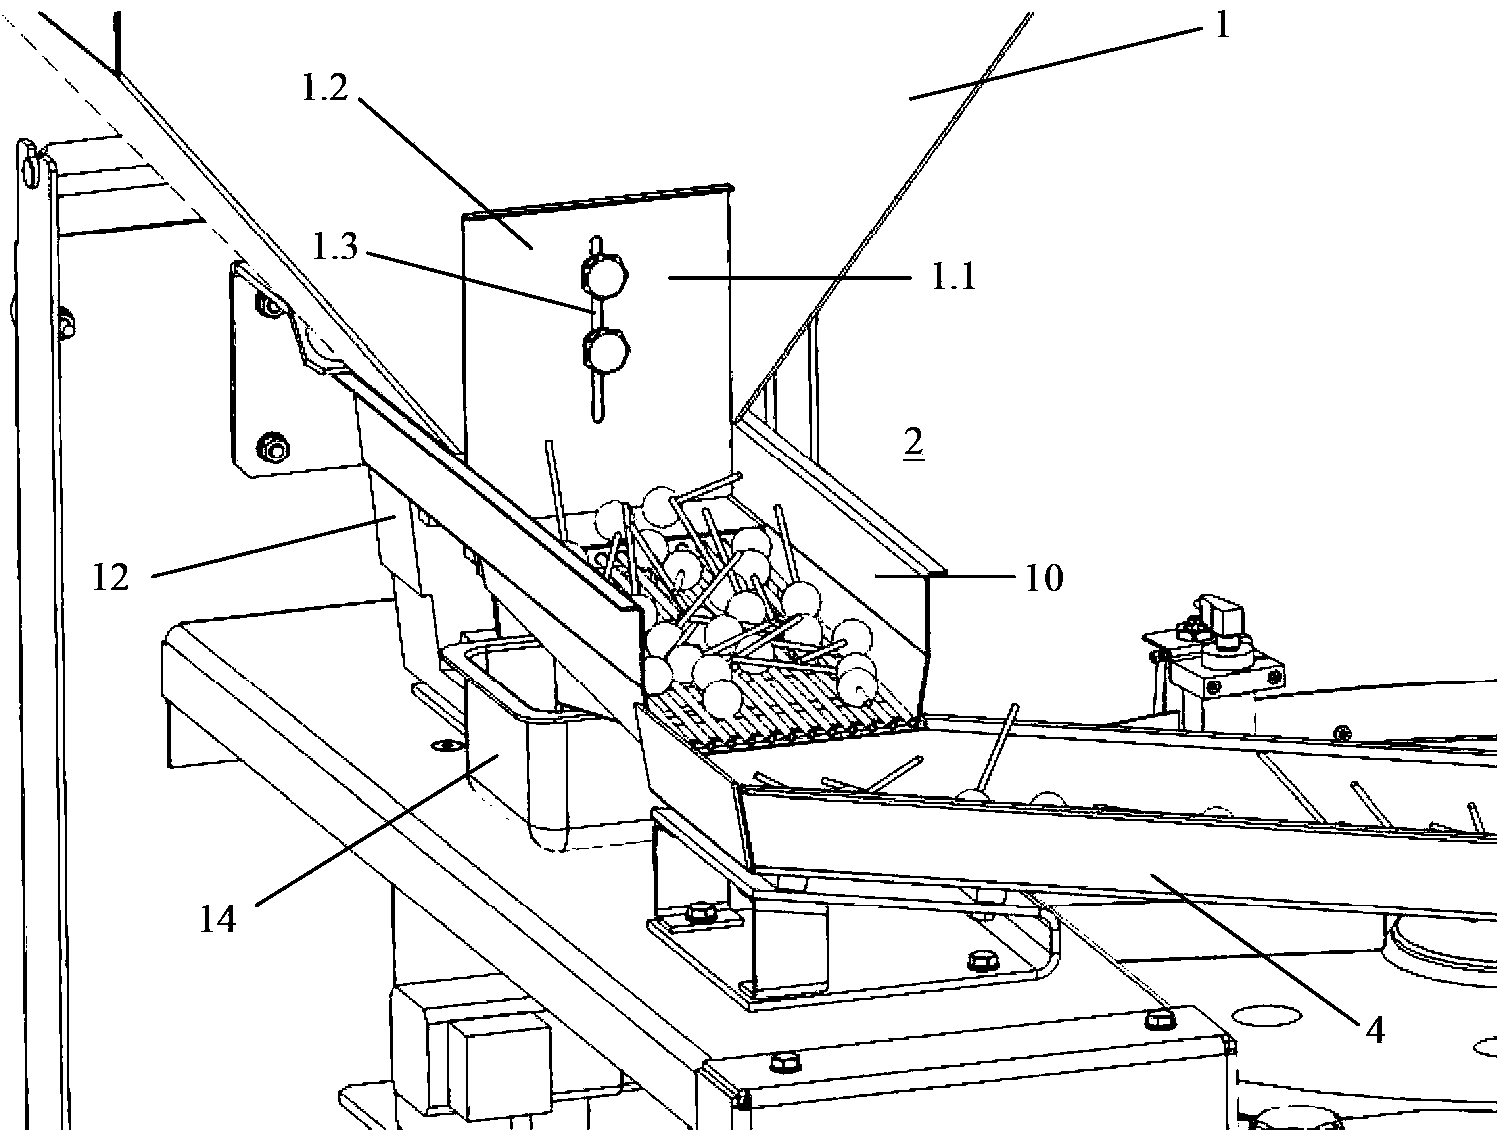 Loading disc of feeding conveying device of candy wrapping machine